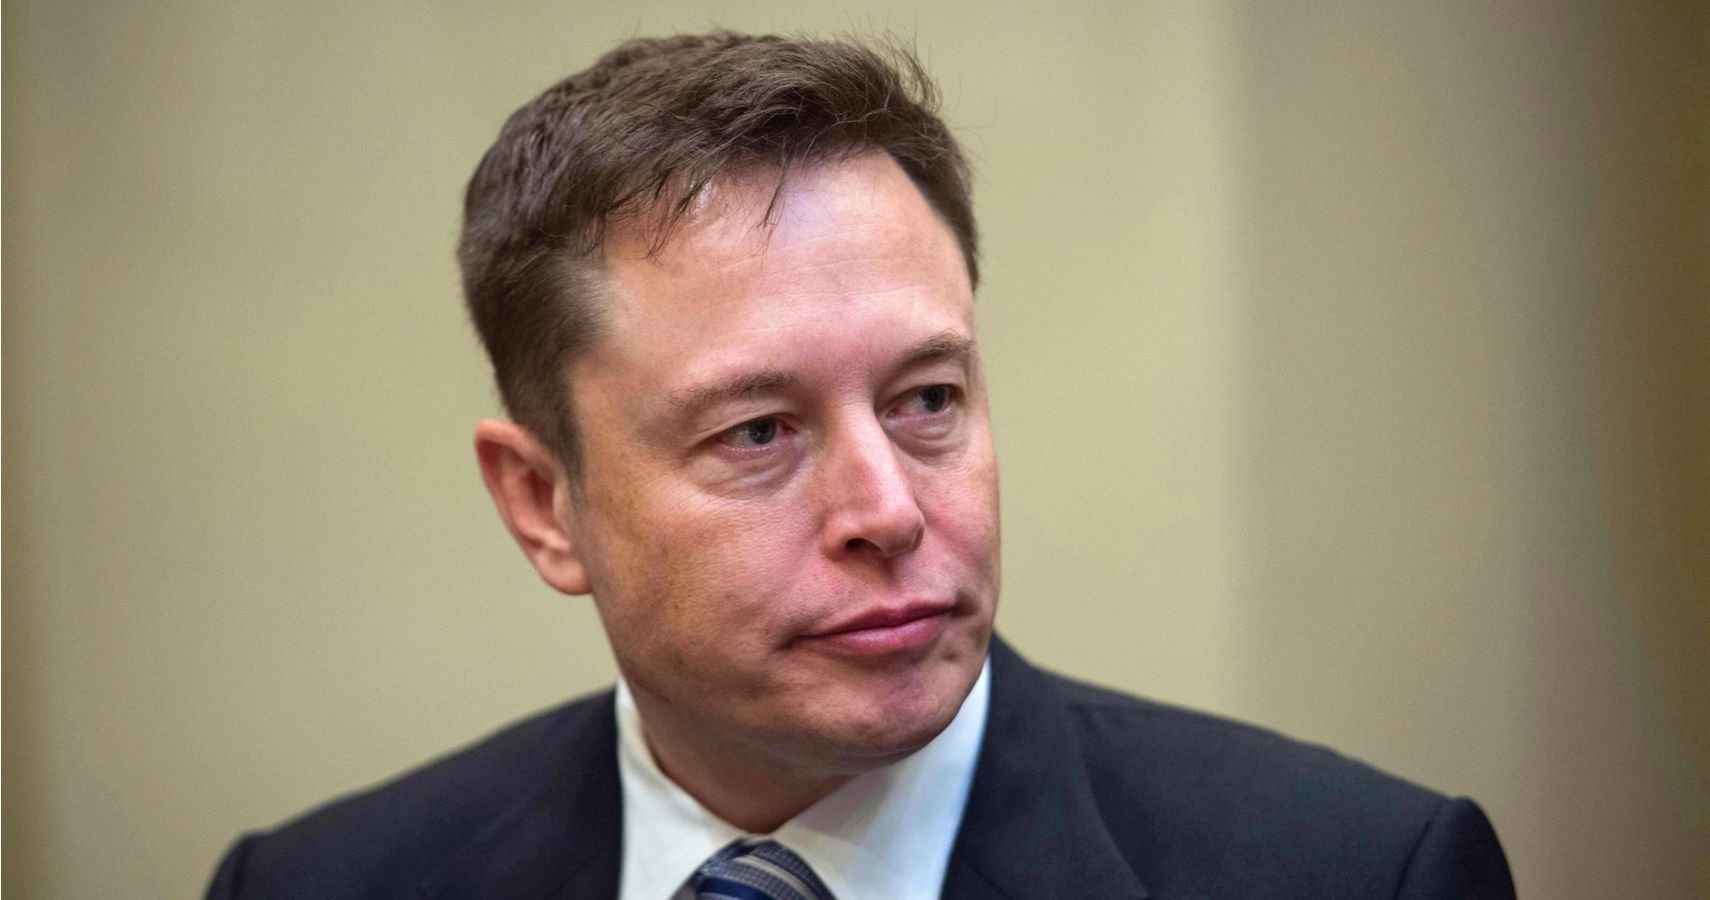 Crypto Fans React To Elon Musk Not Accepting Bitcoin Payments For Tesla